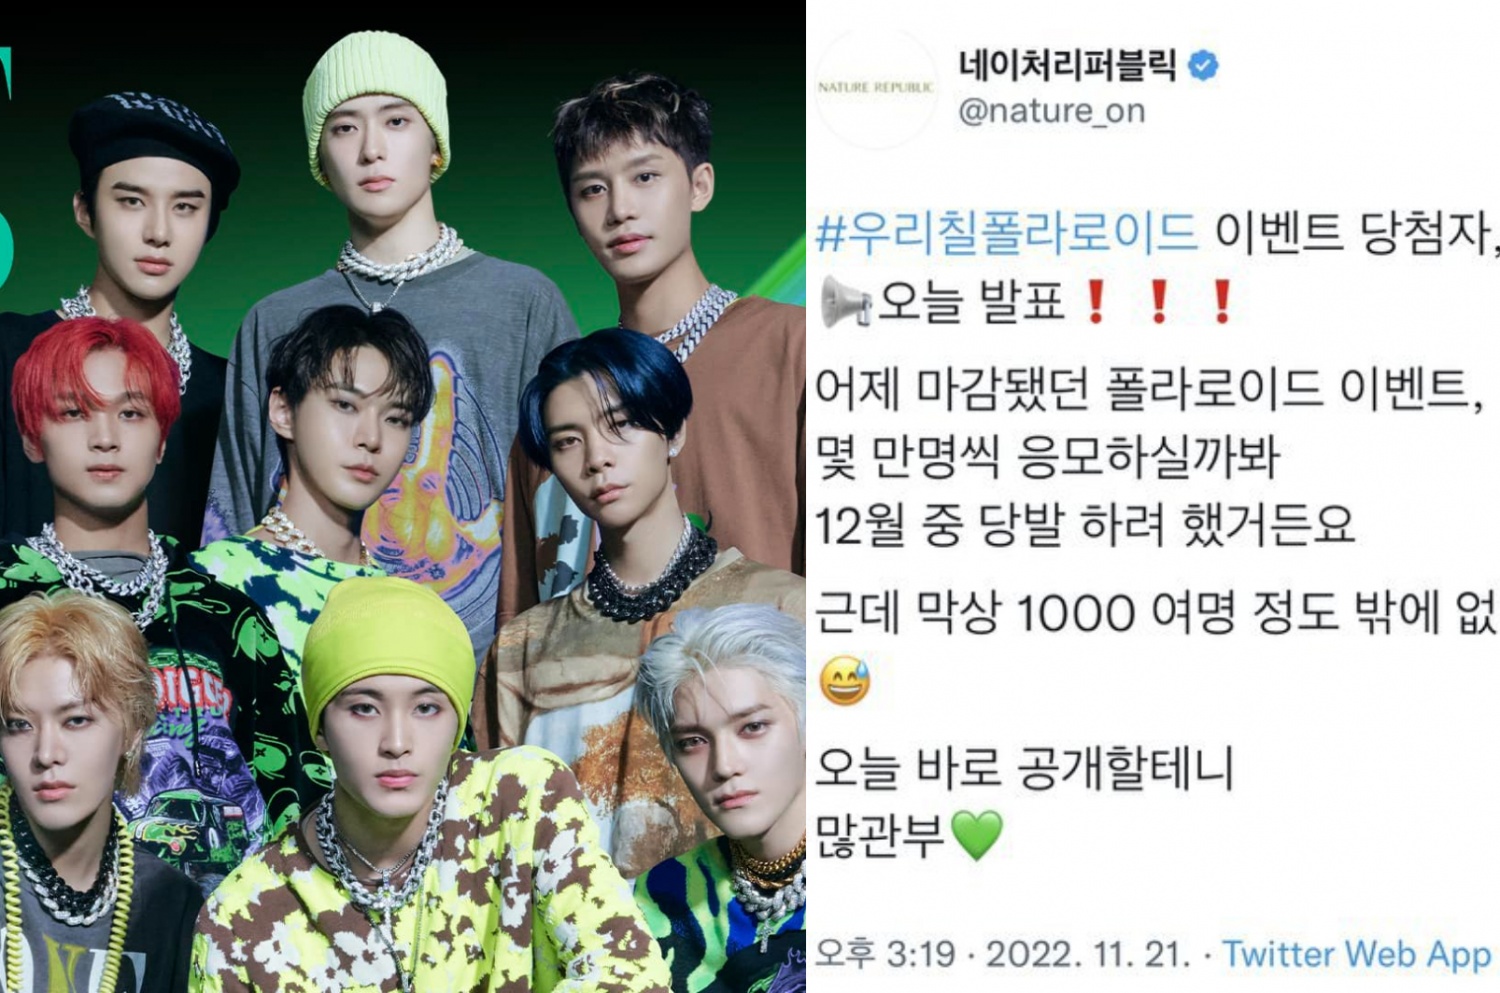 Nature Republic releases a statement following its “Mocking” NCT 127 tweets